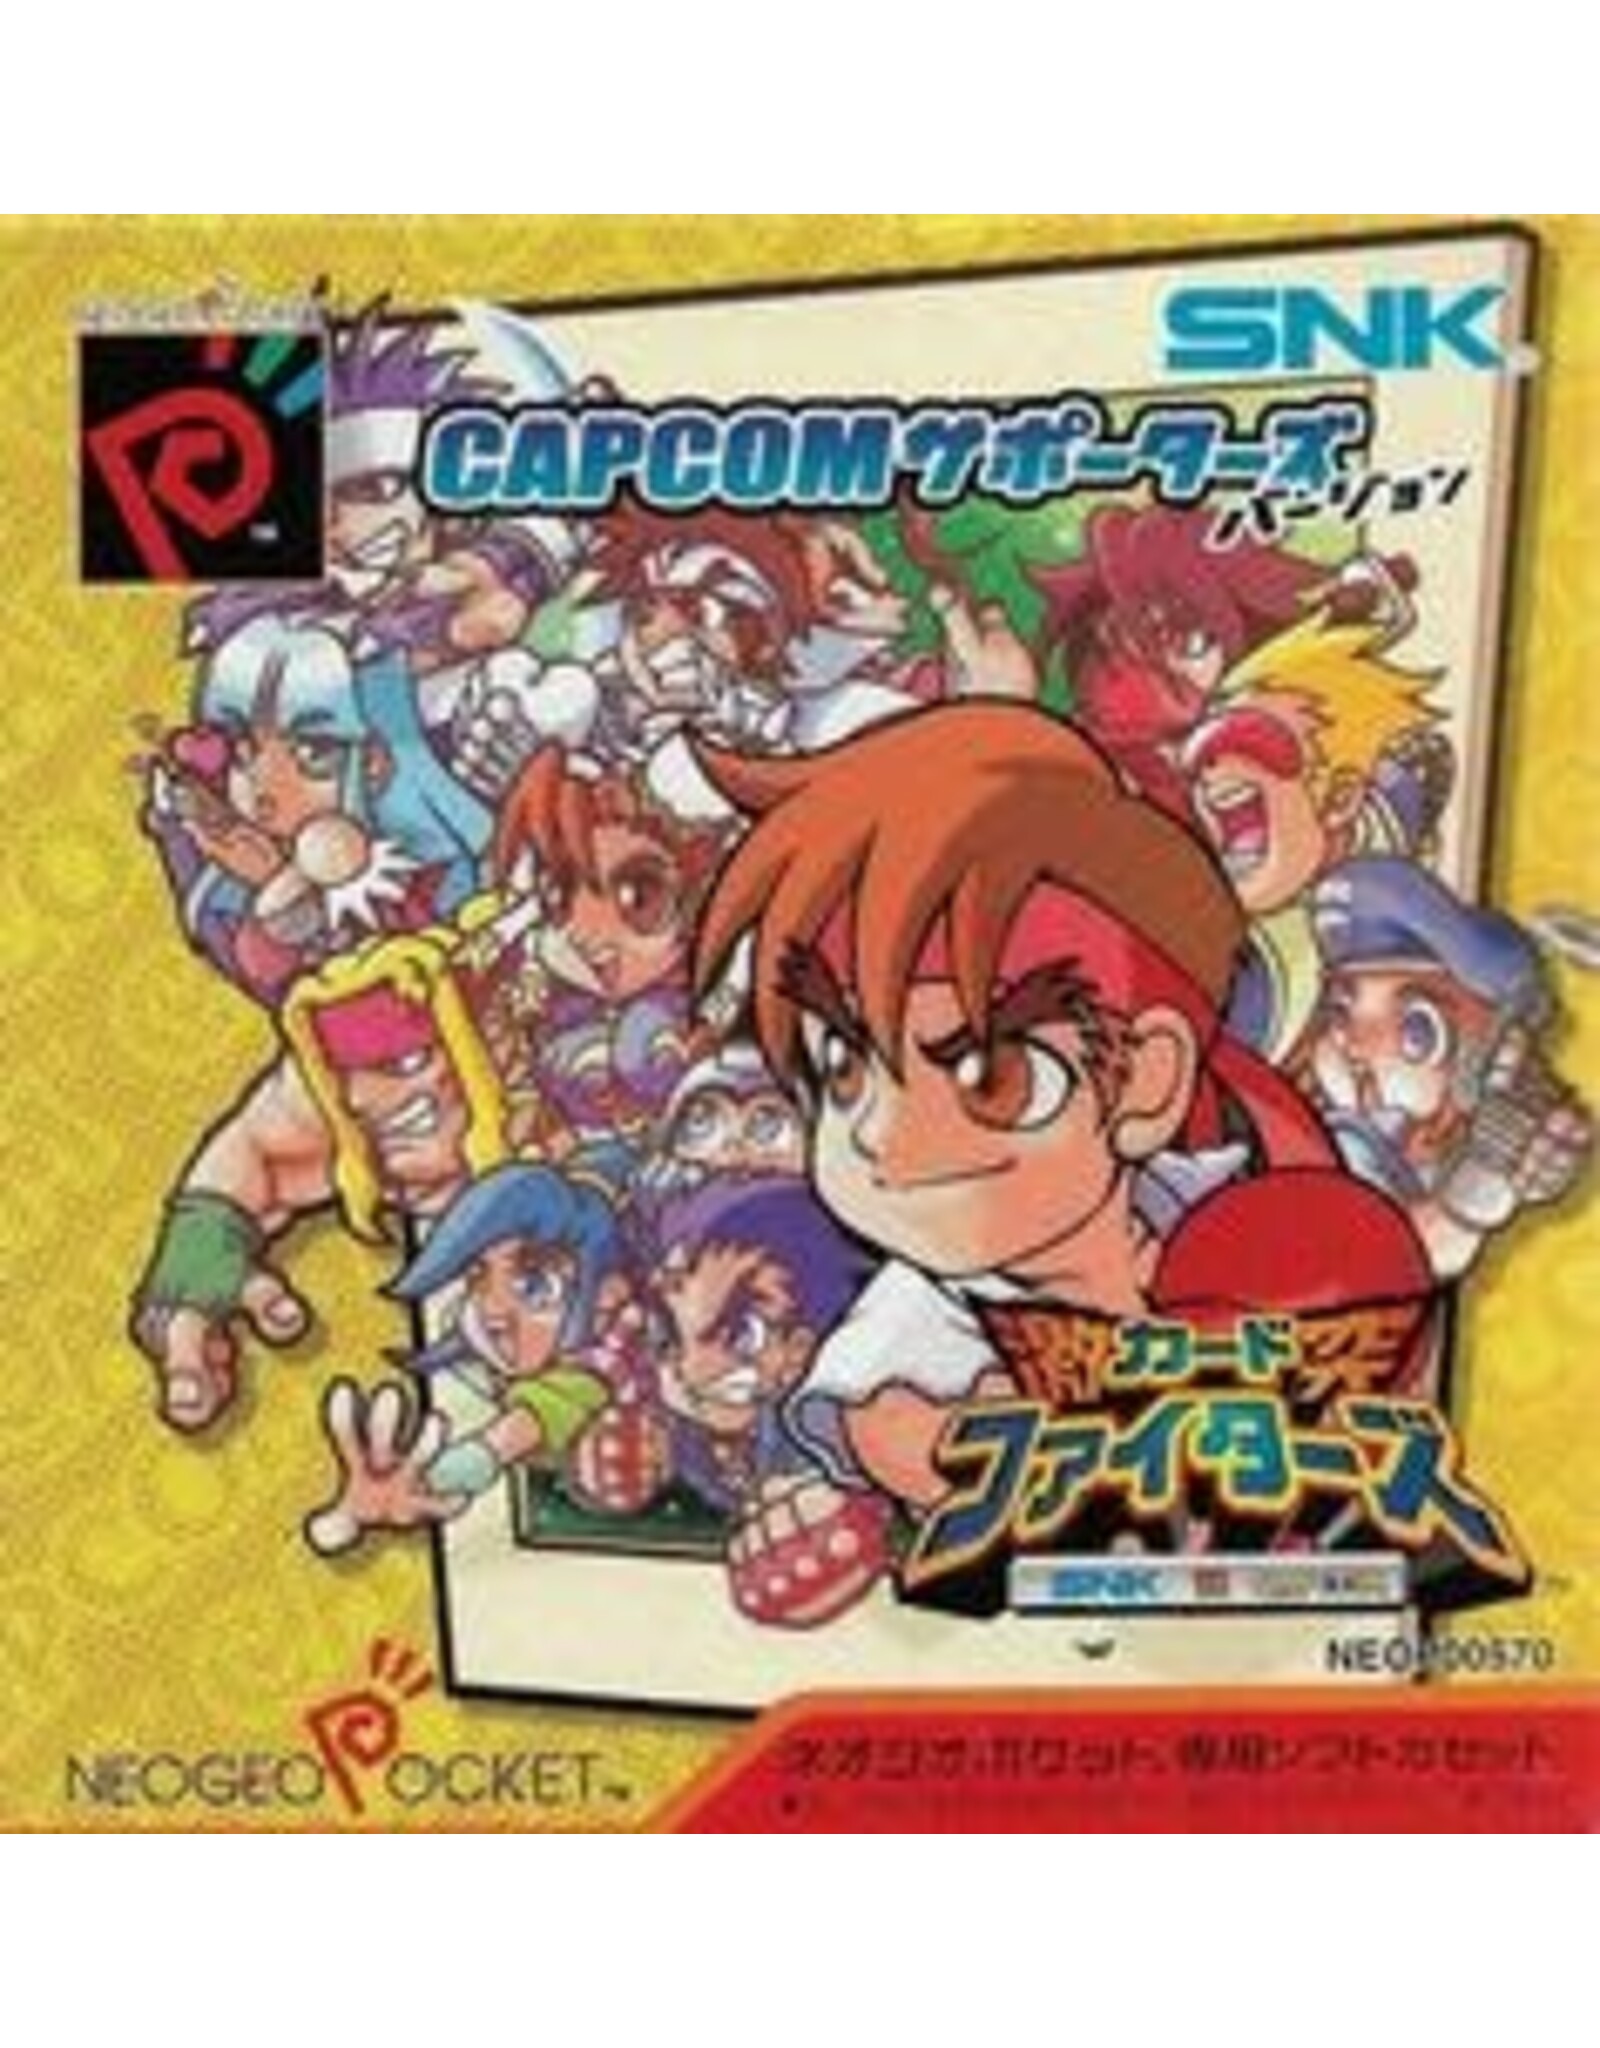 Neo Geo Pocket Color SNK vs. Capcom: Card Fighters' Clash (CiB with Wireless Adaptor, Lightly Damaged Box, JP Import)